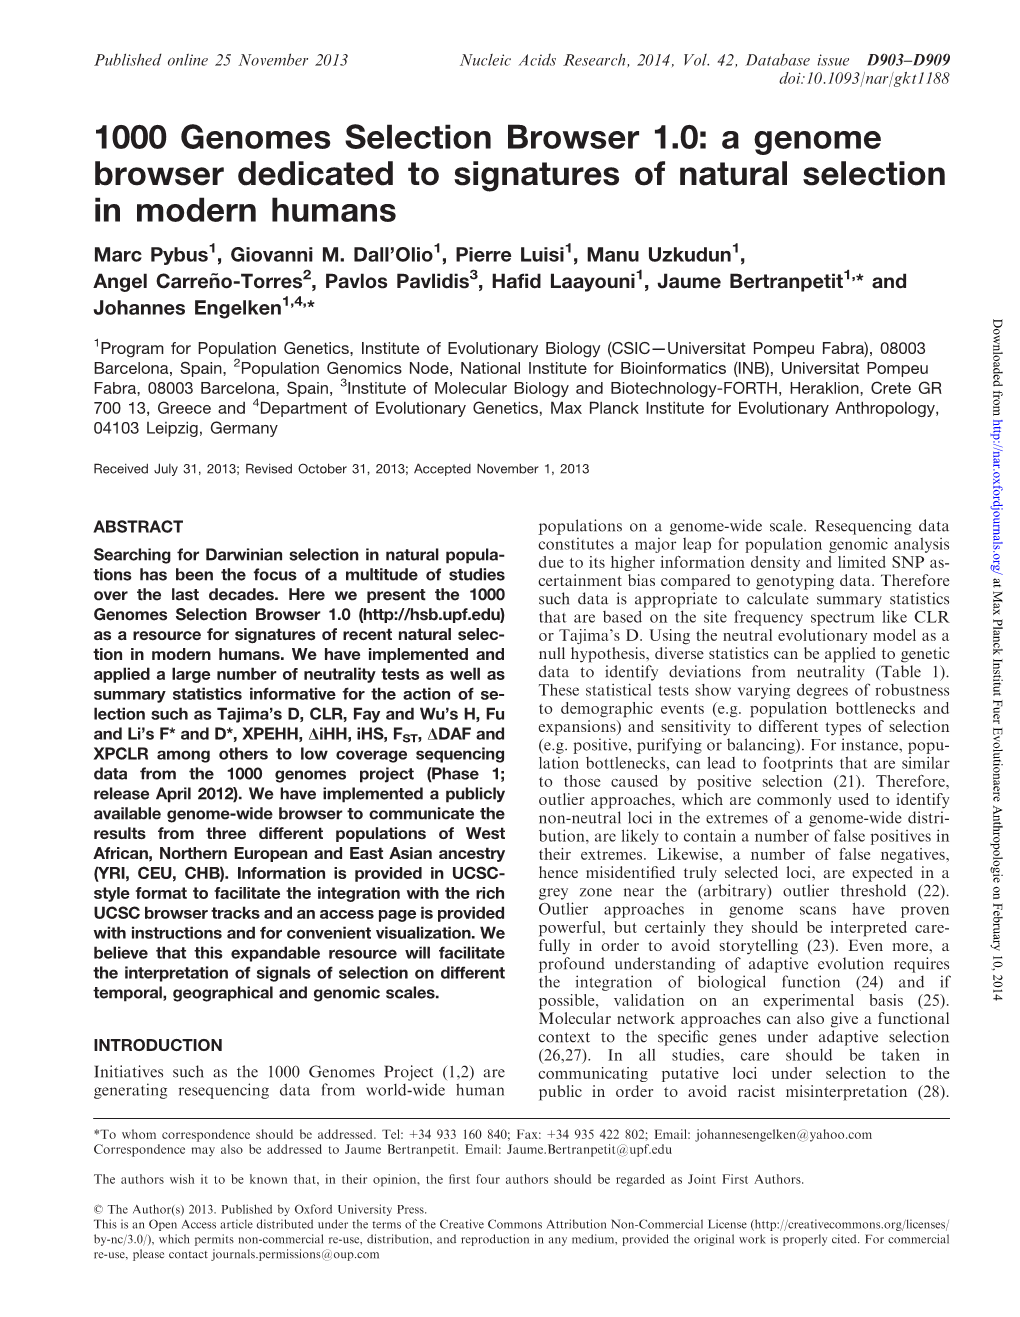 1000 Genomes Selection Browser 1.0: a Genome Browser Dedicated to Signatures of Natural Selection in Modern Humans Marc Pybus1, Giovanni M